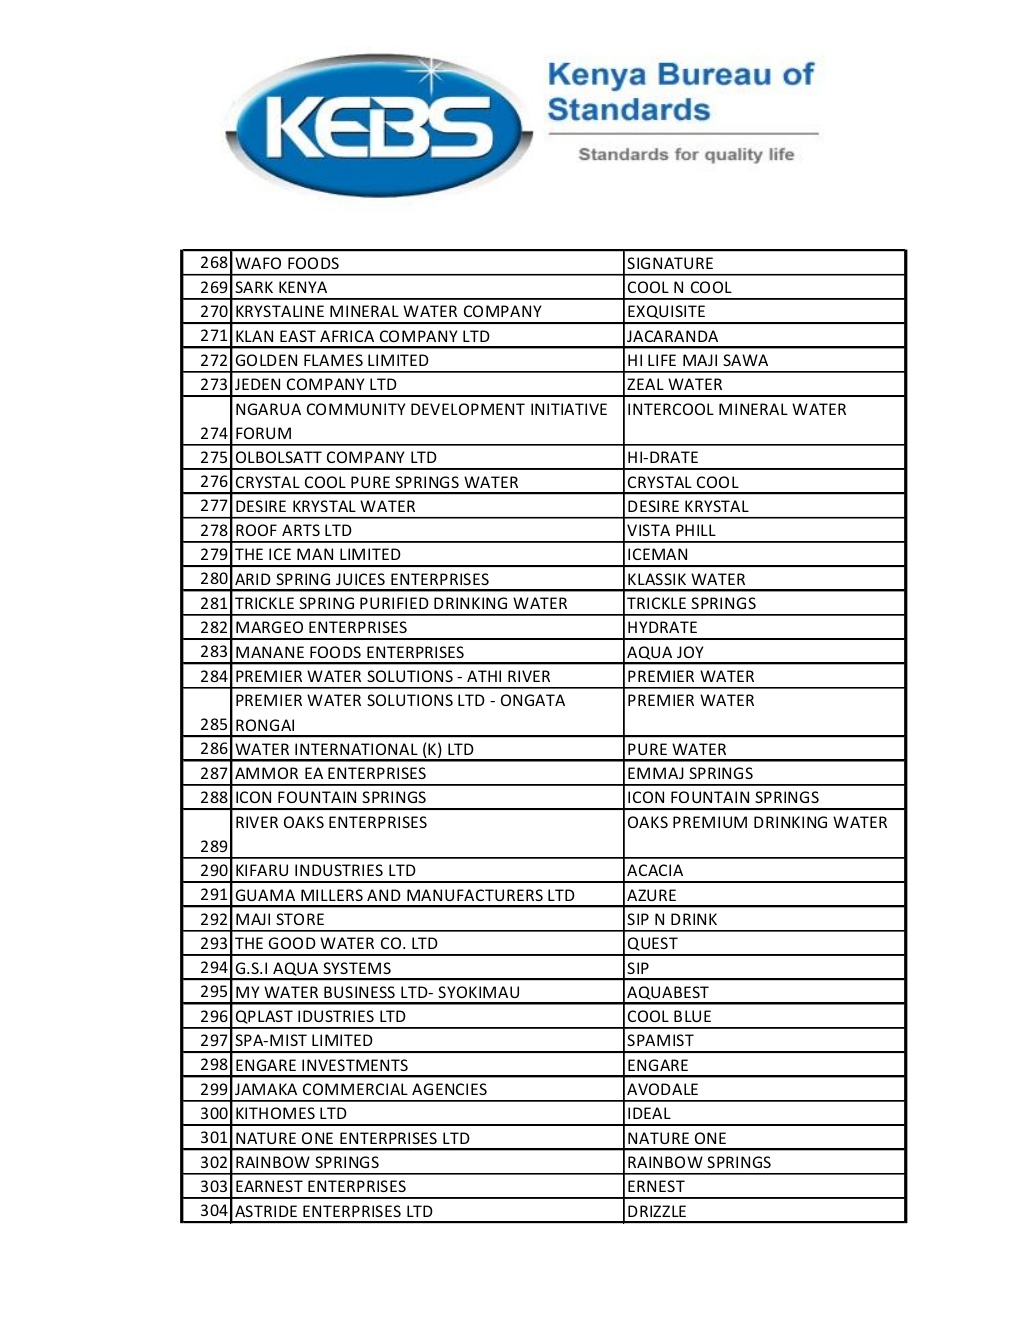 list-of-368-water-brands-banned-by-kebs-8-1024